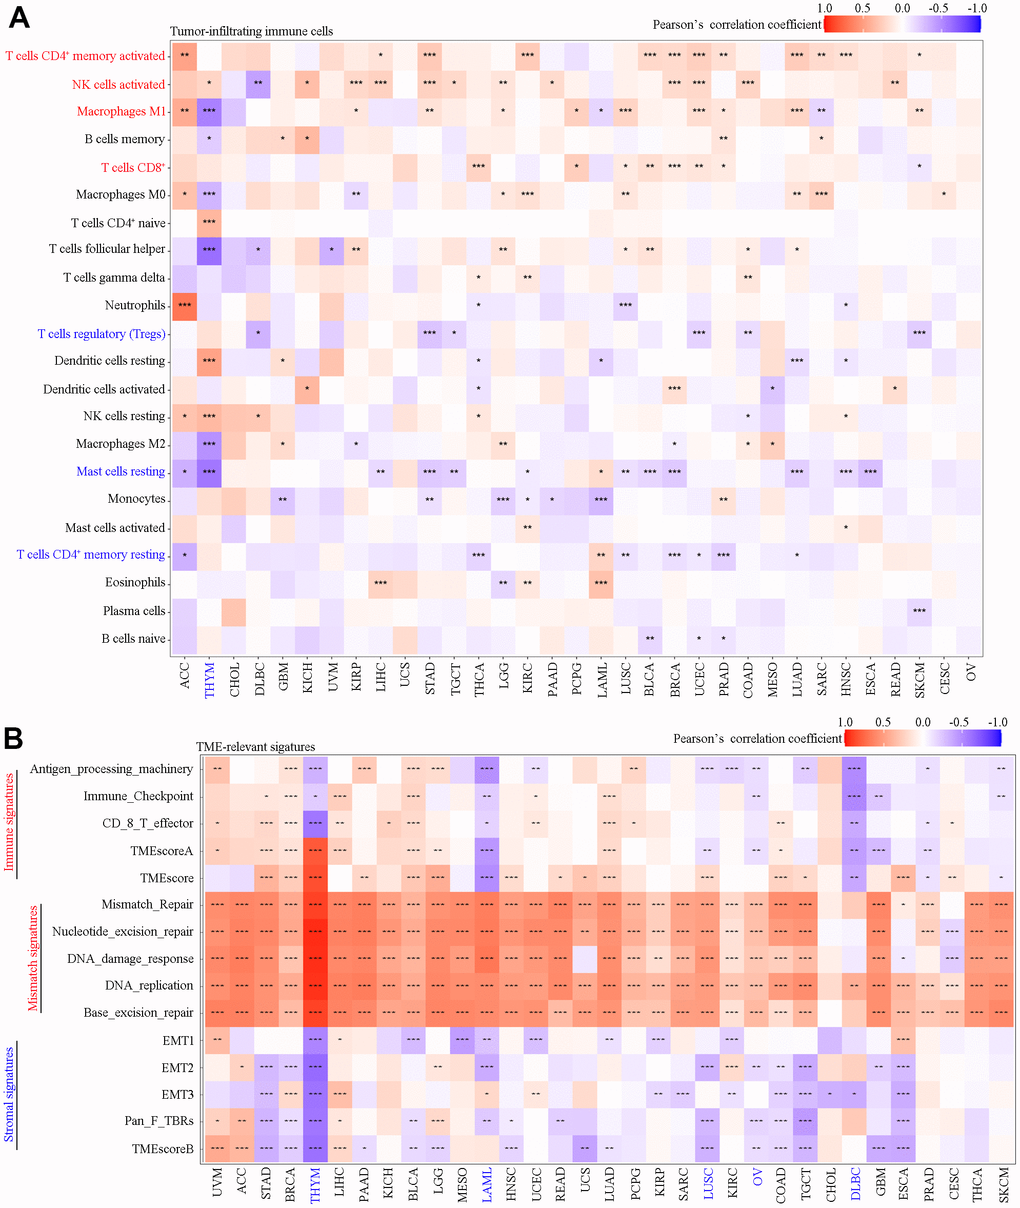 Correlation analysis of SAAL1 expression with tumor-infiltrating immune cells and TME-relevant signatures in various cancer types. (A) Tumor-infiltrating immune cells. (B) TME-relevant signatures. *P